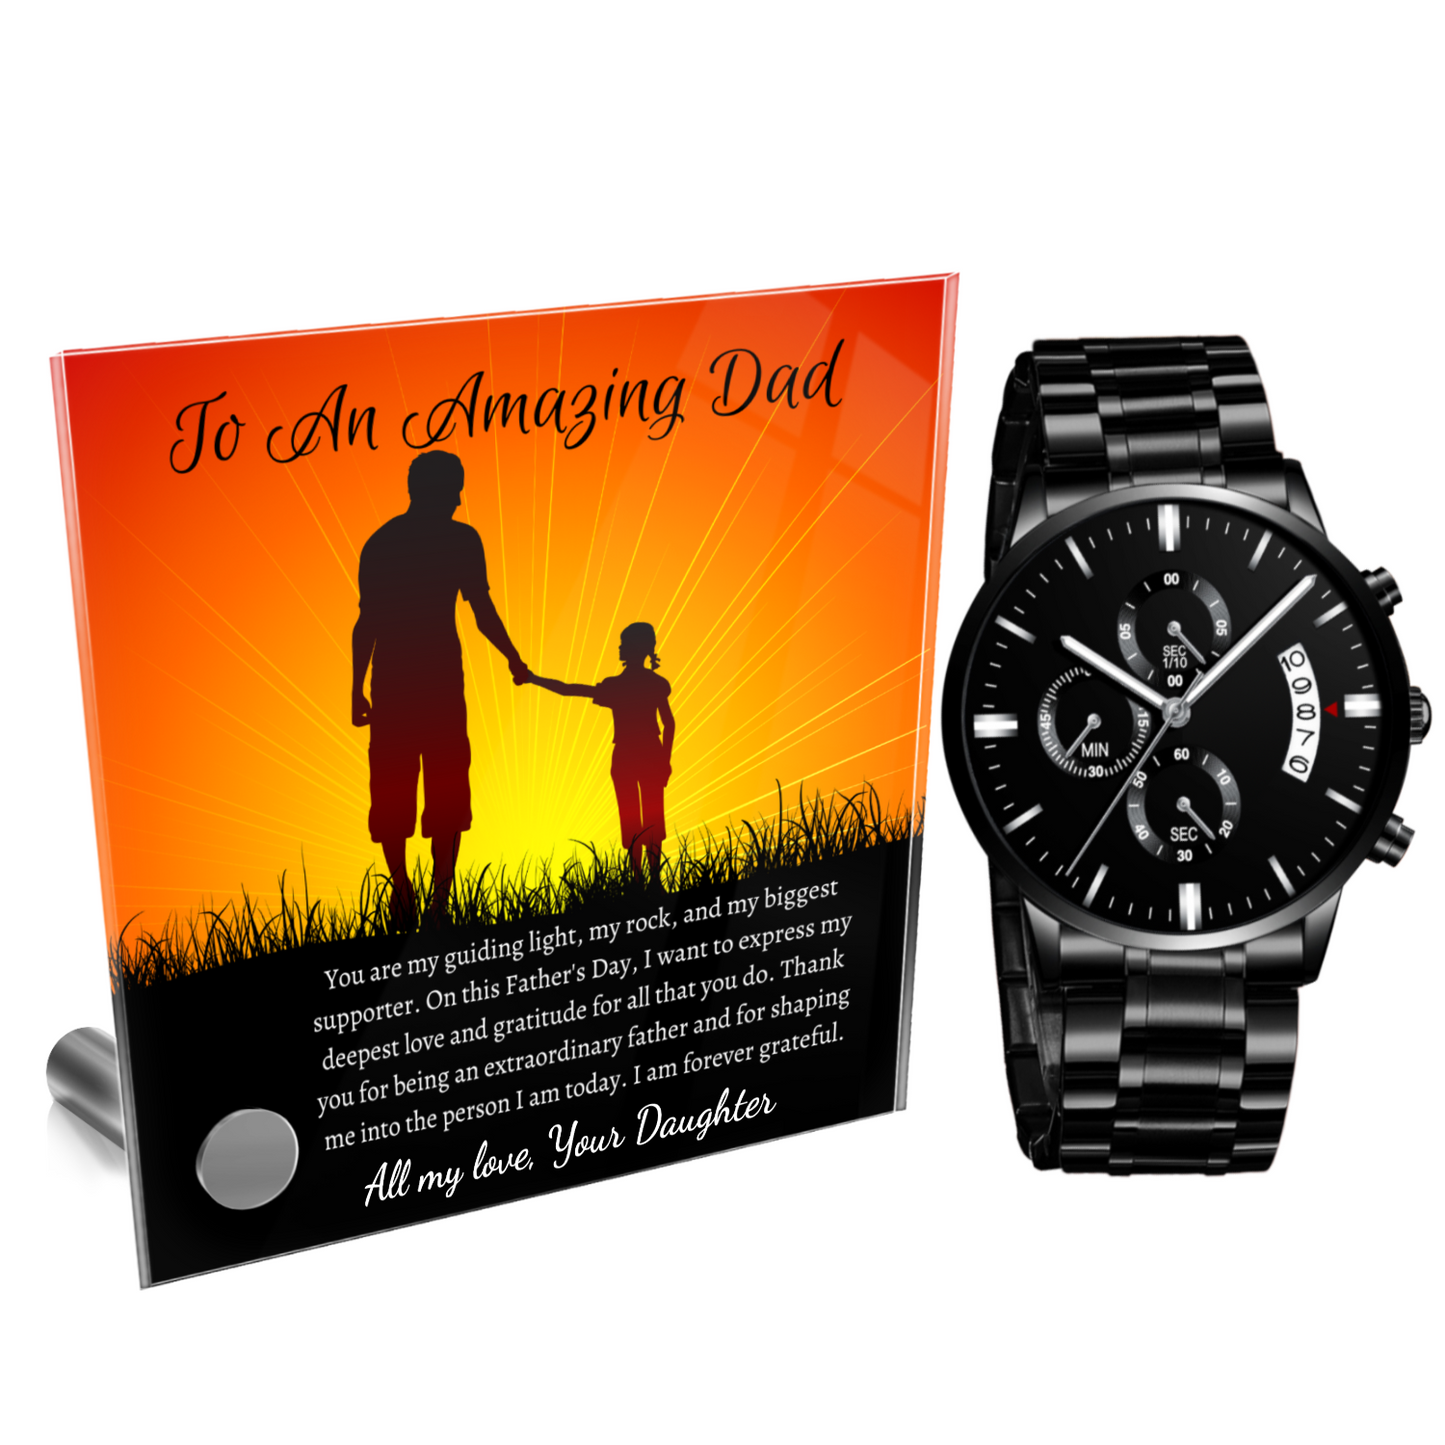 Fathers Day Gift From Daughter - Personalized Glass Message Card and Watch Set - Mardonyx